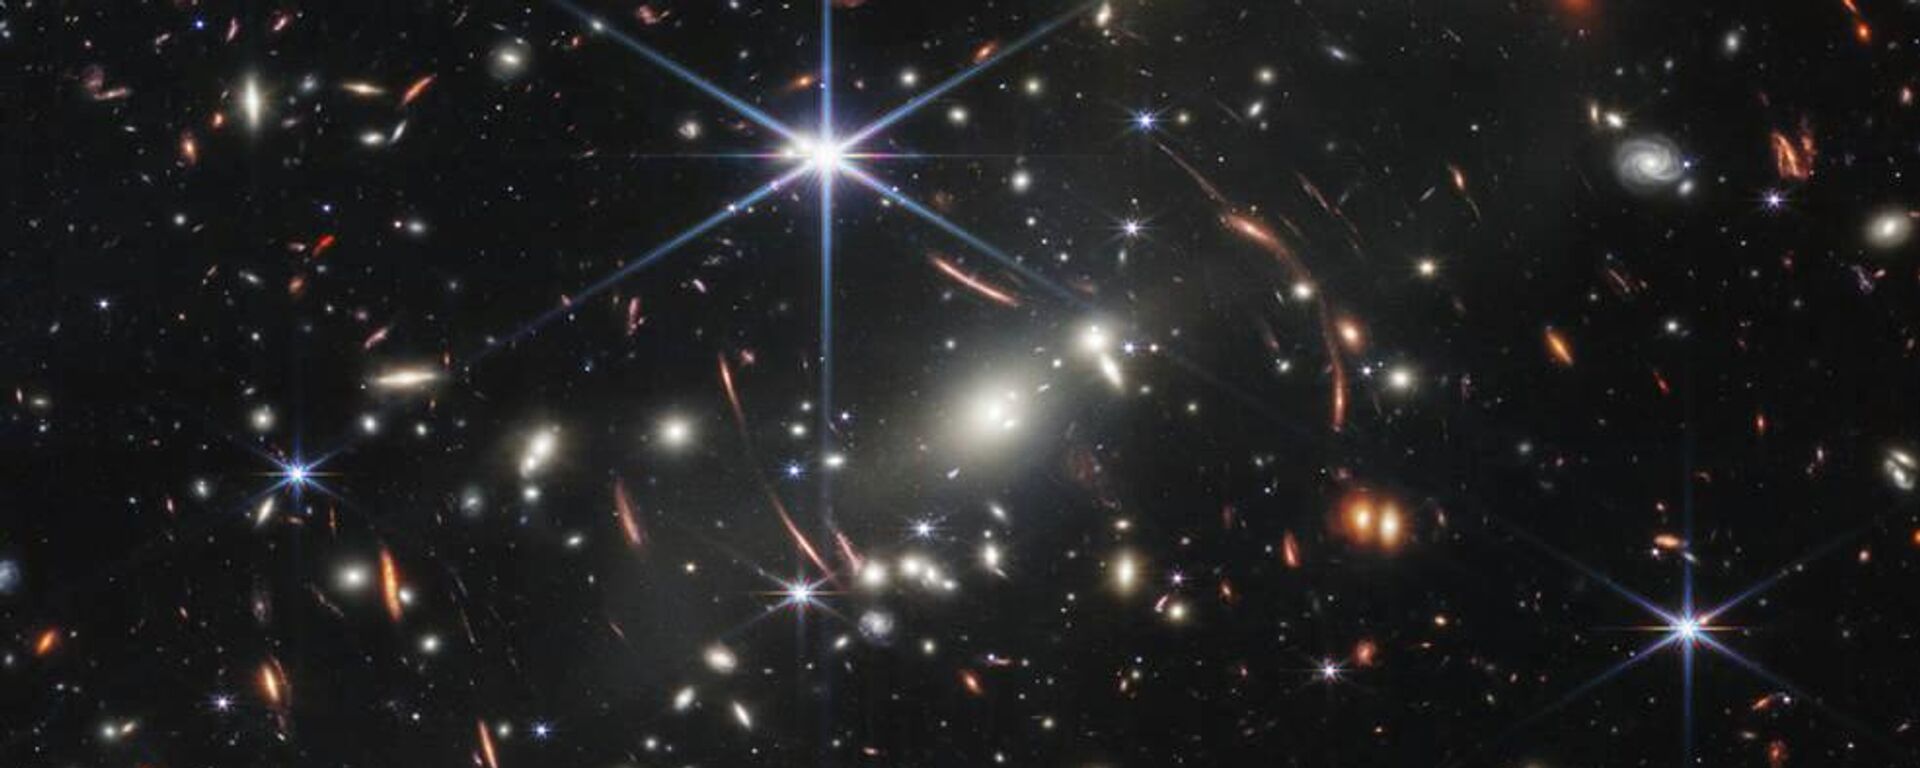 NASA’s James Webb Space Telescope has produced the deepest and sharpest infrared image of the distant universe to date. Known as Webb’s First Deep Field, this image of galaxy cluster SMACS 0723 is overflowing with detail. - Sputnik International, 1920, 12.07.2022